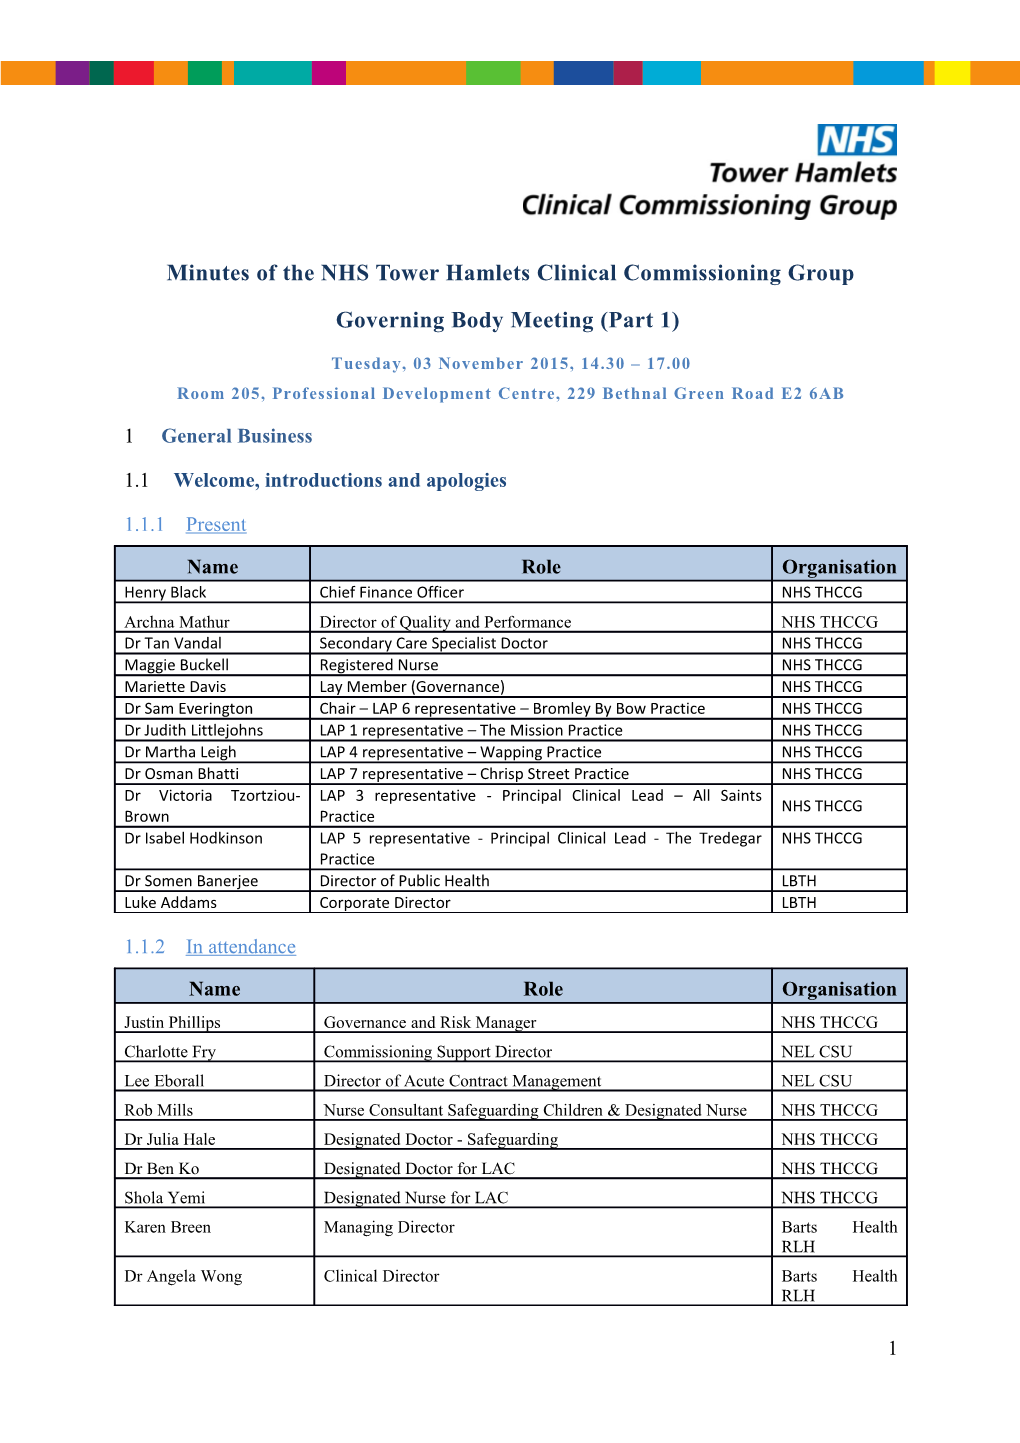 Minutes of the NHS Tower Hamlets Clinical Commissioning Group